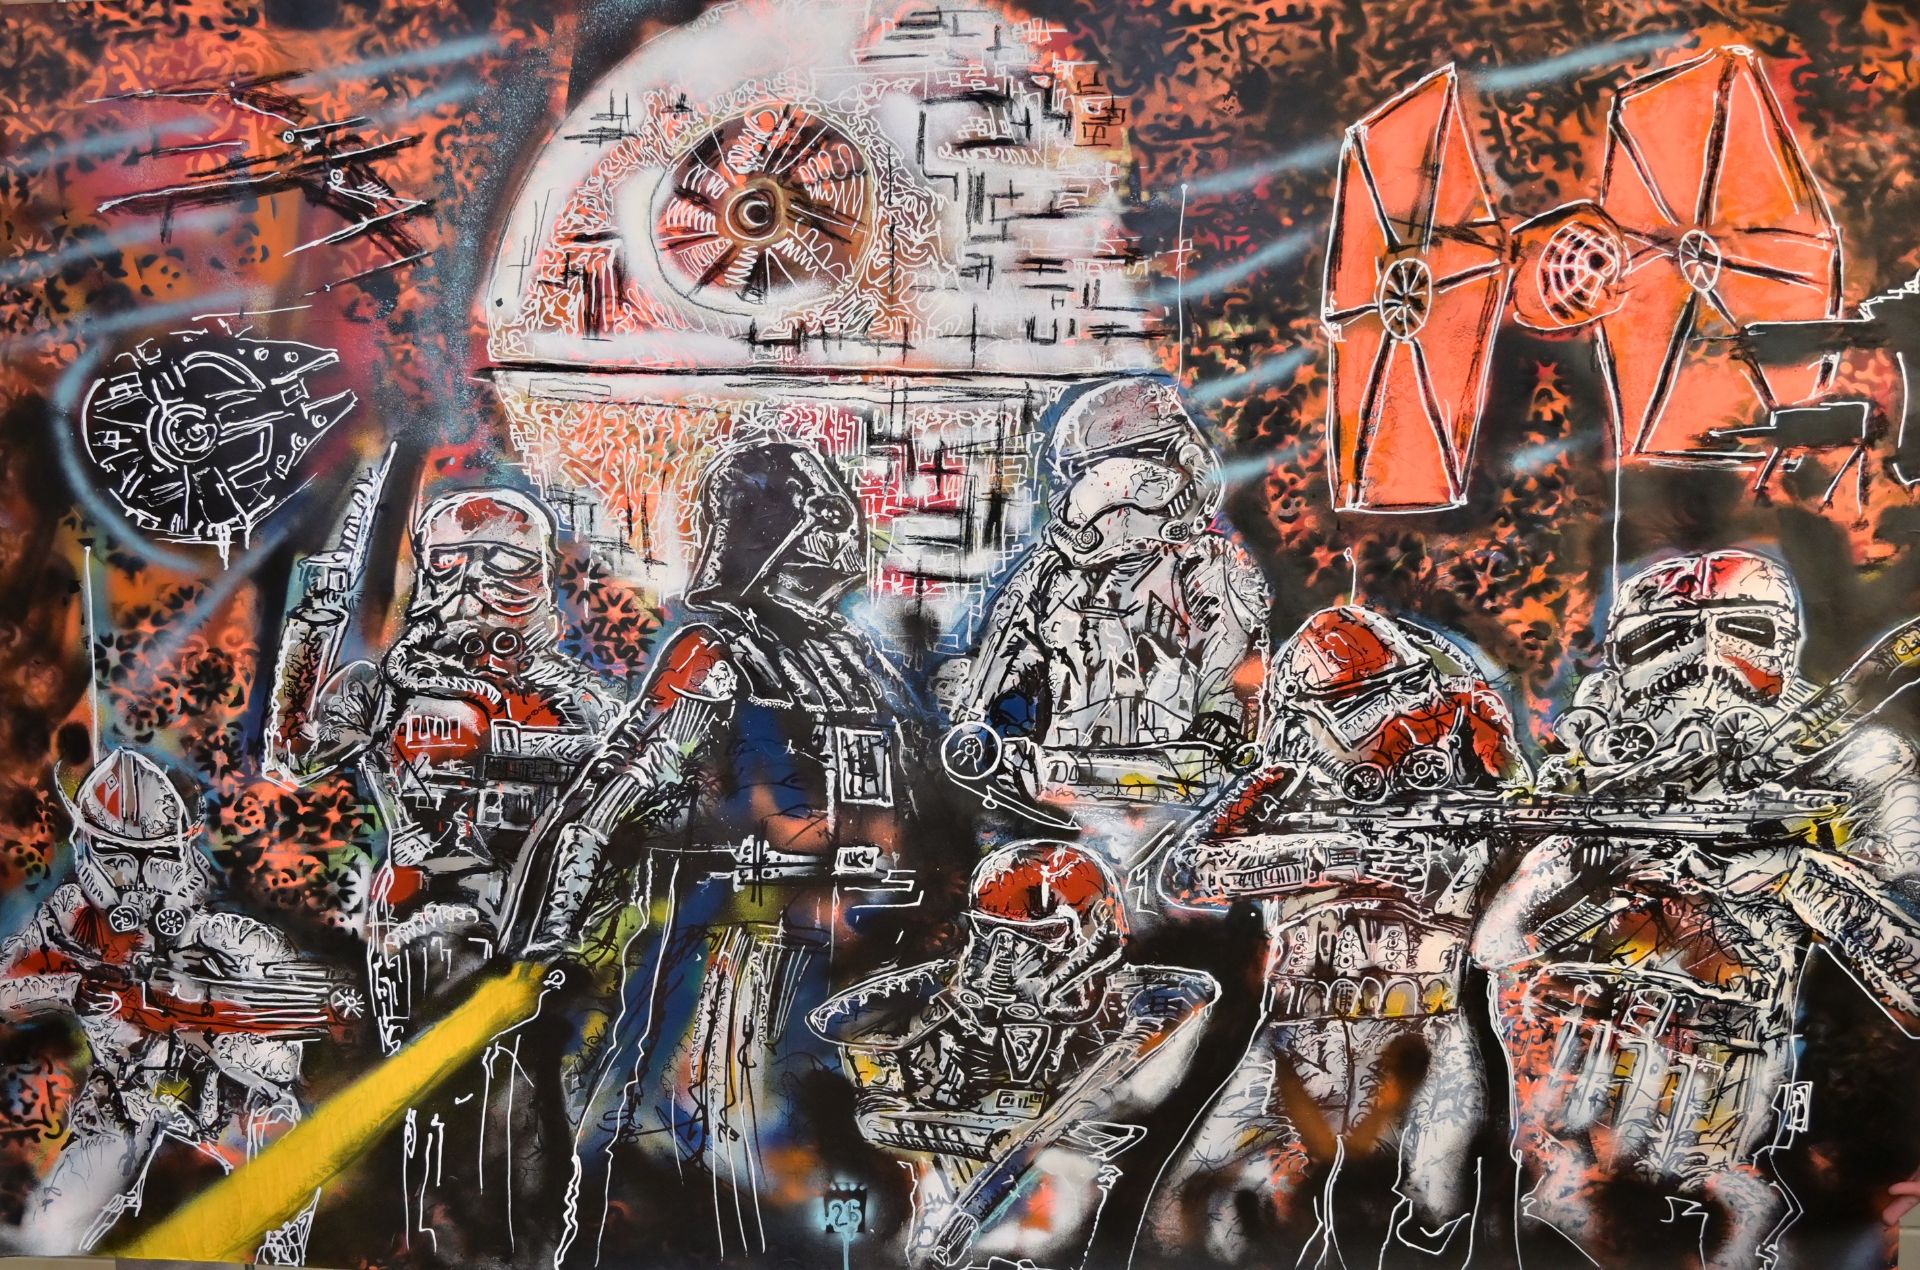 Original painting Star Wars I. Acrylic on paper. Big size. Signature of the author - 26. 1999 - Image 3 of 6